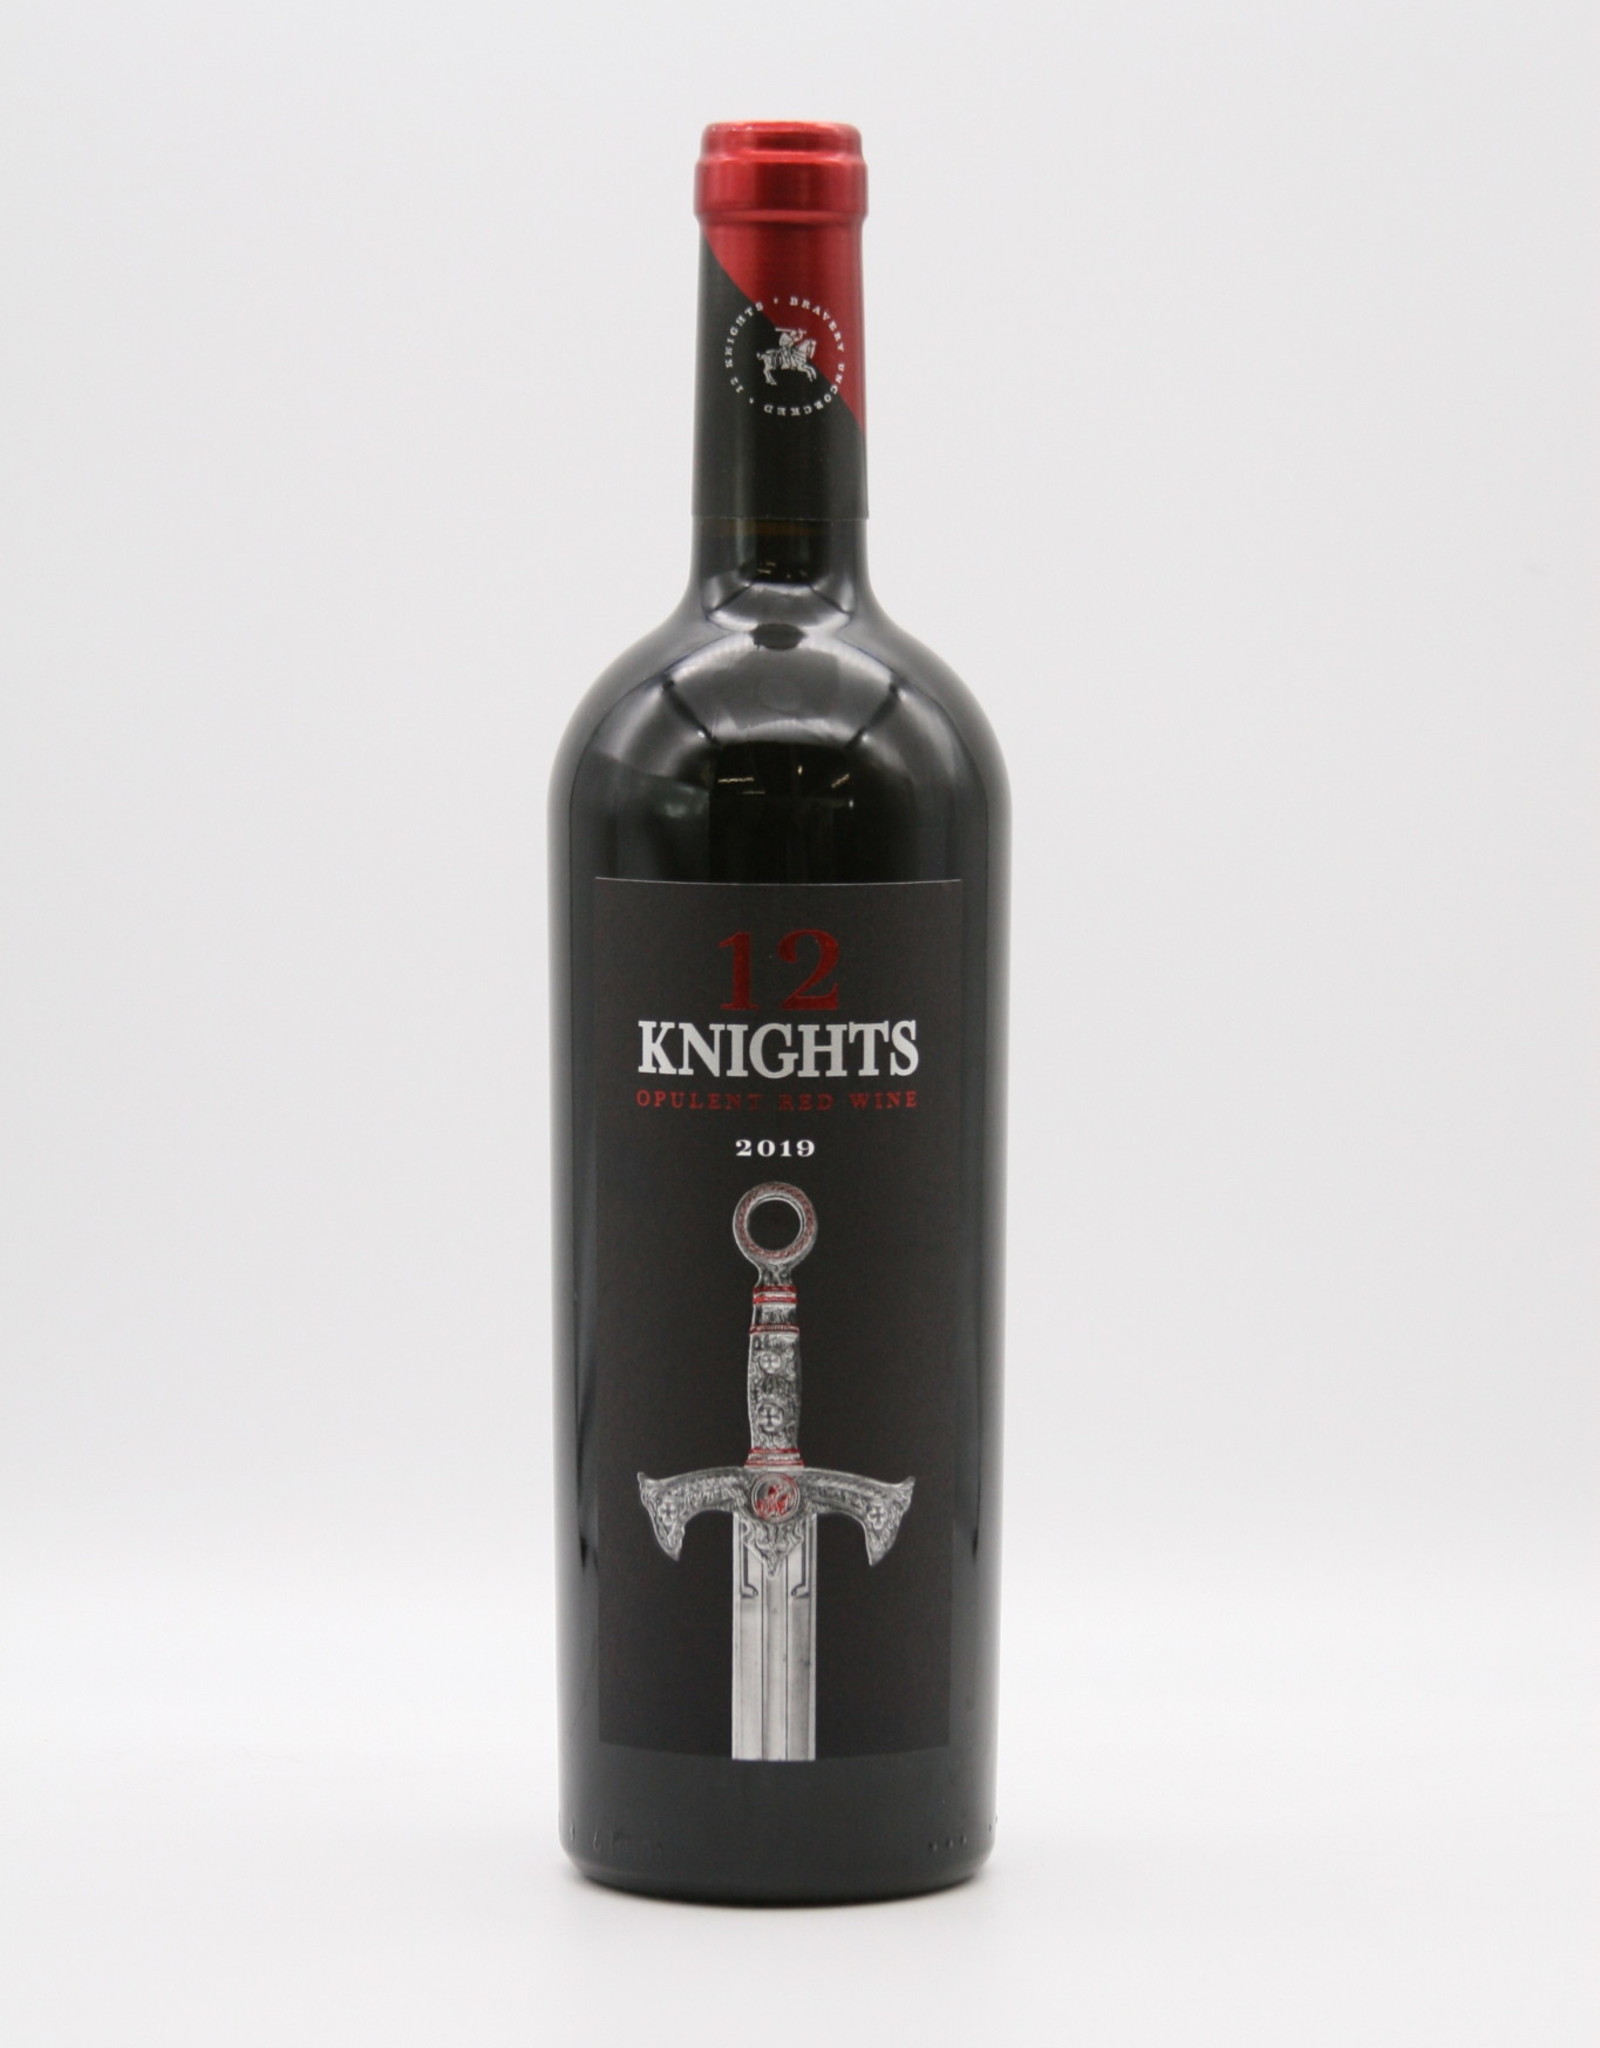 12 Knights Red Blend